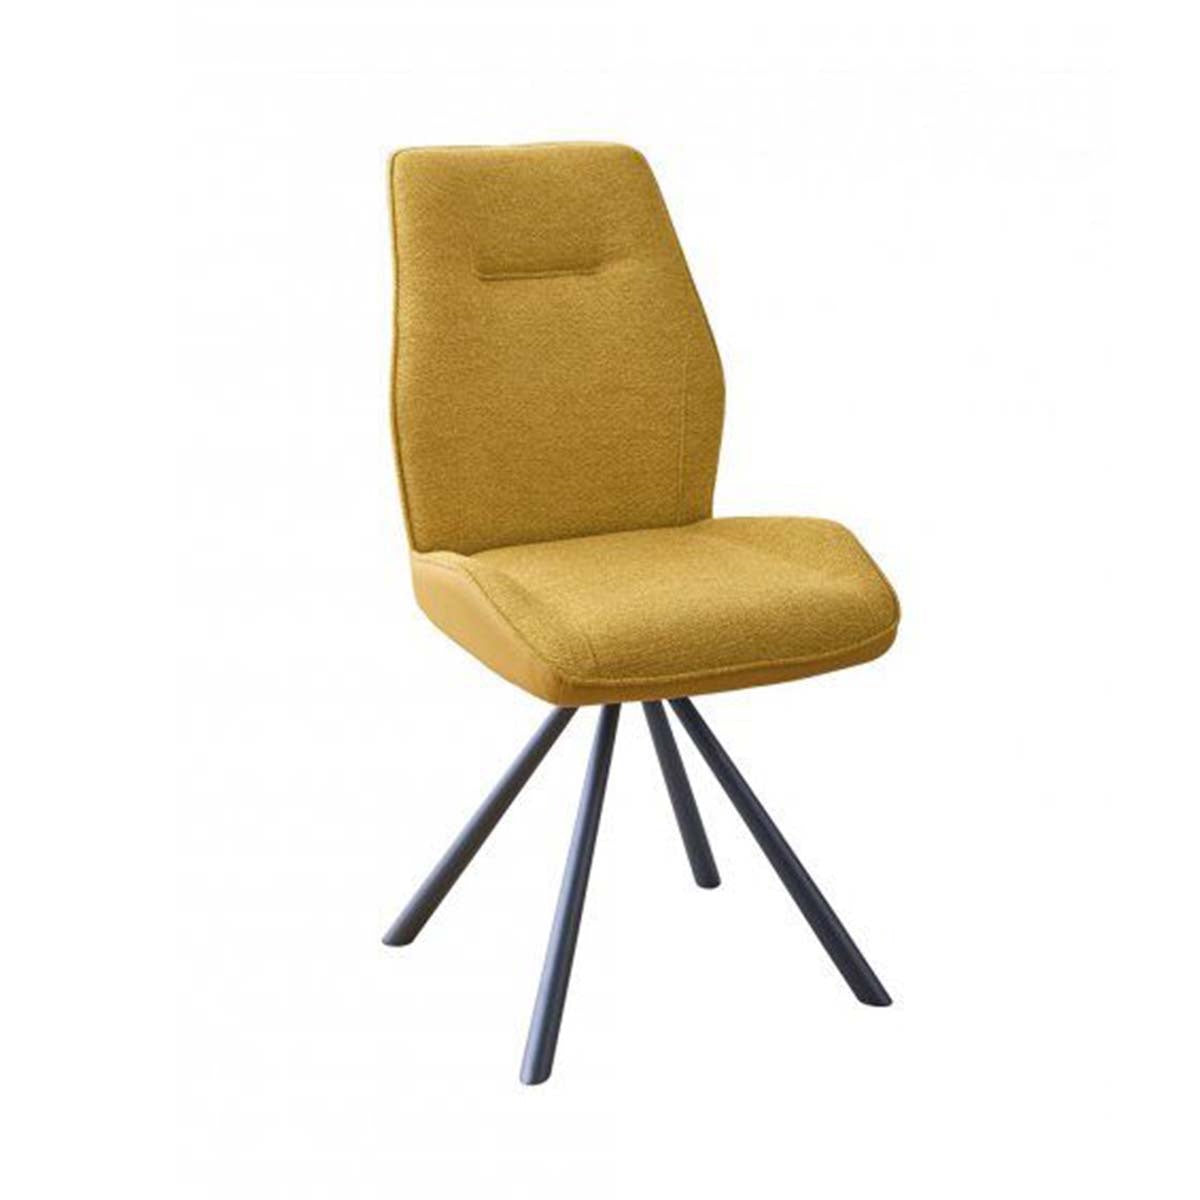 Curry Fabric Dining Chair - Black Legs